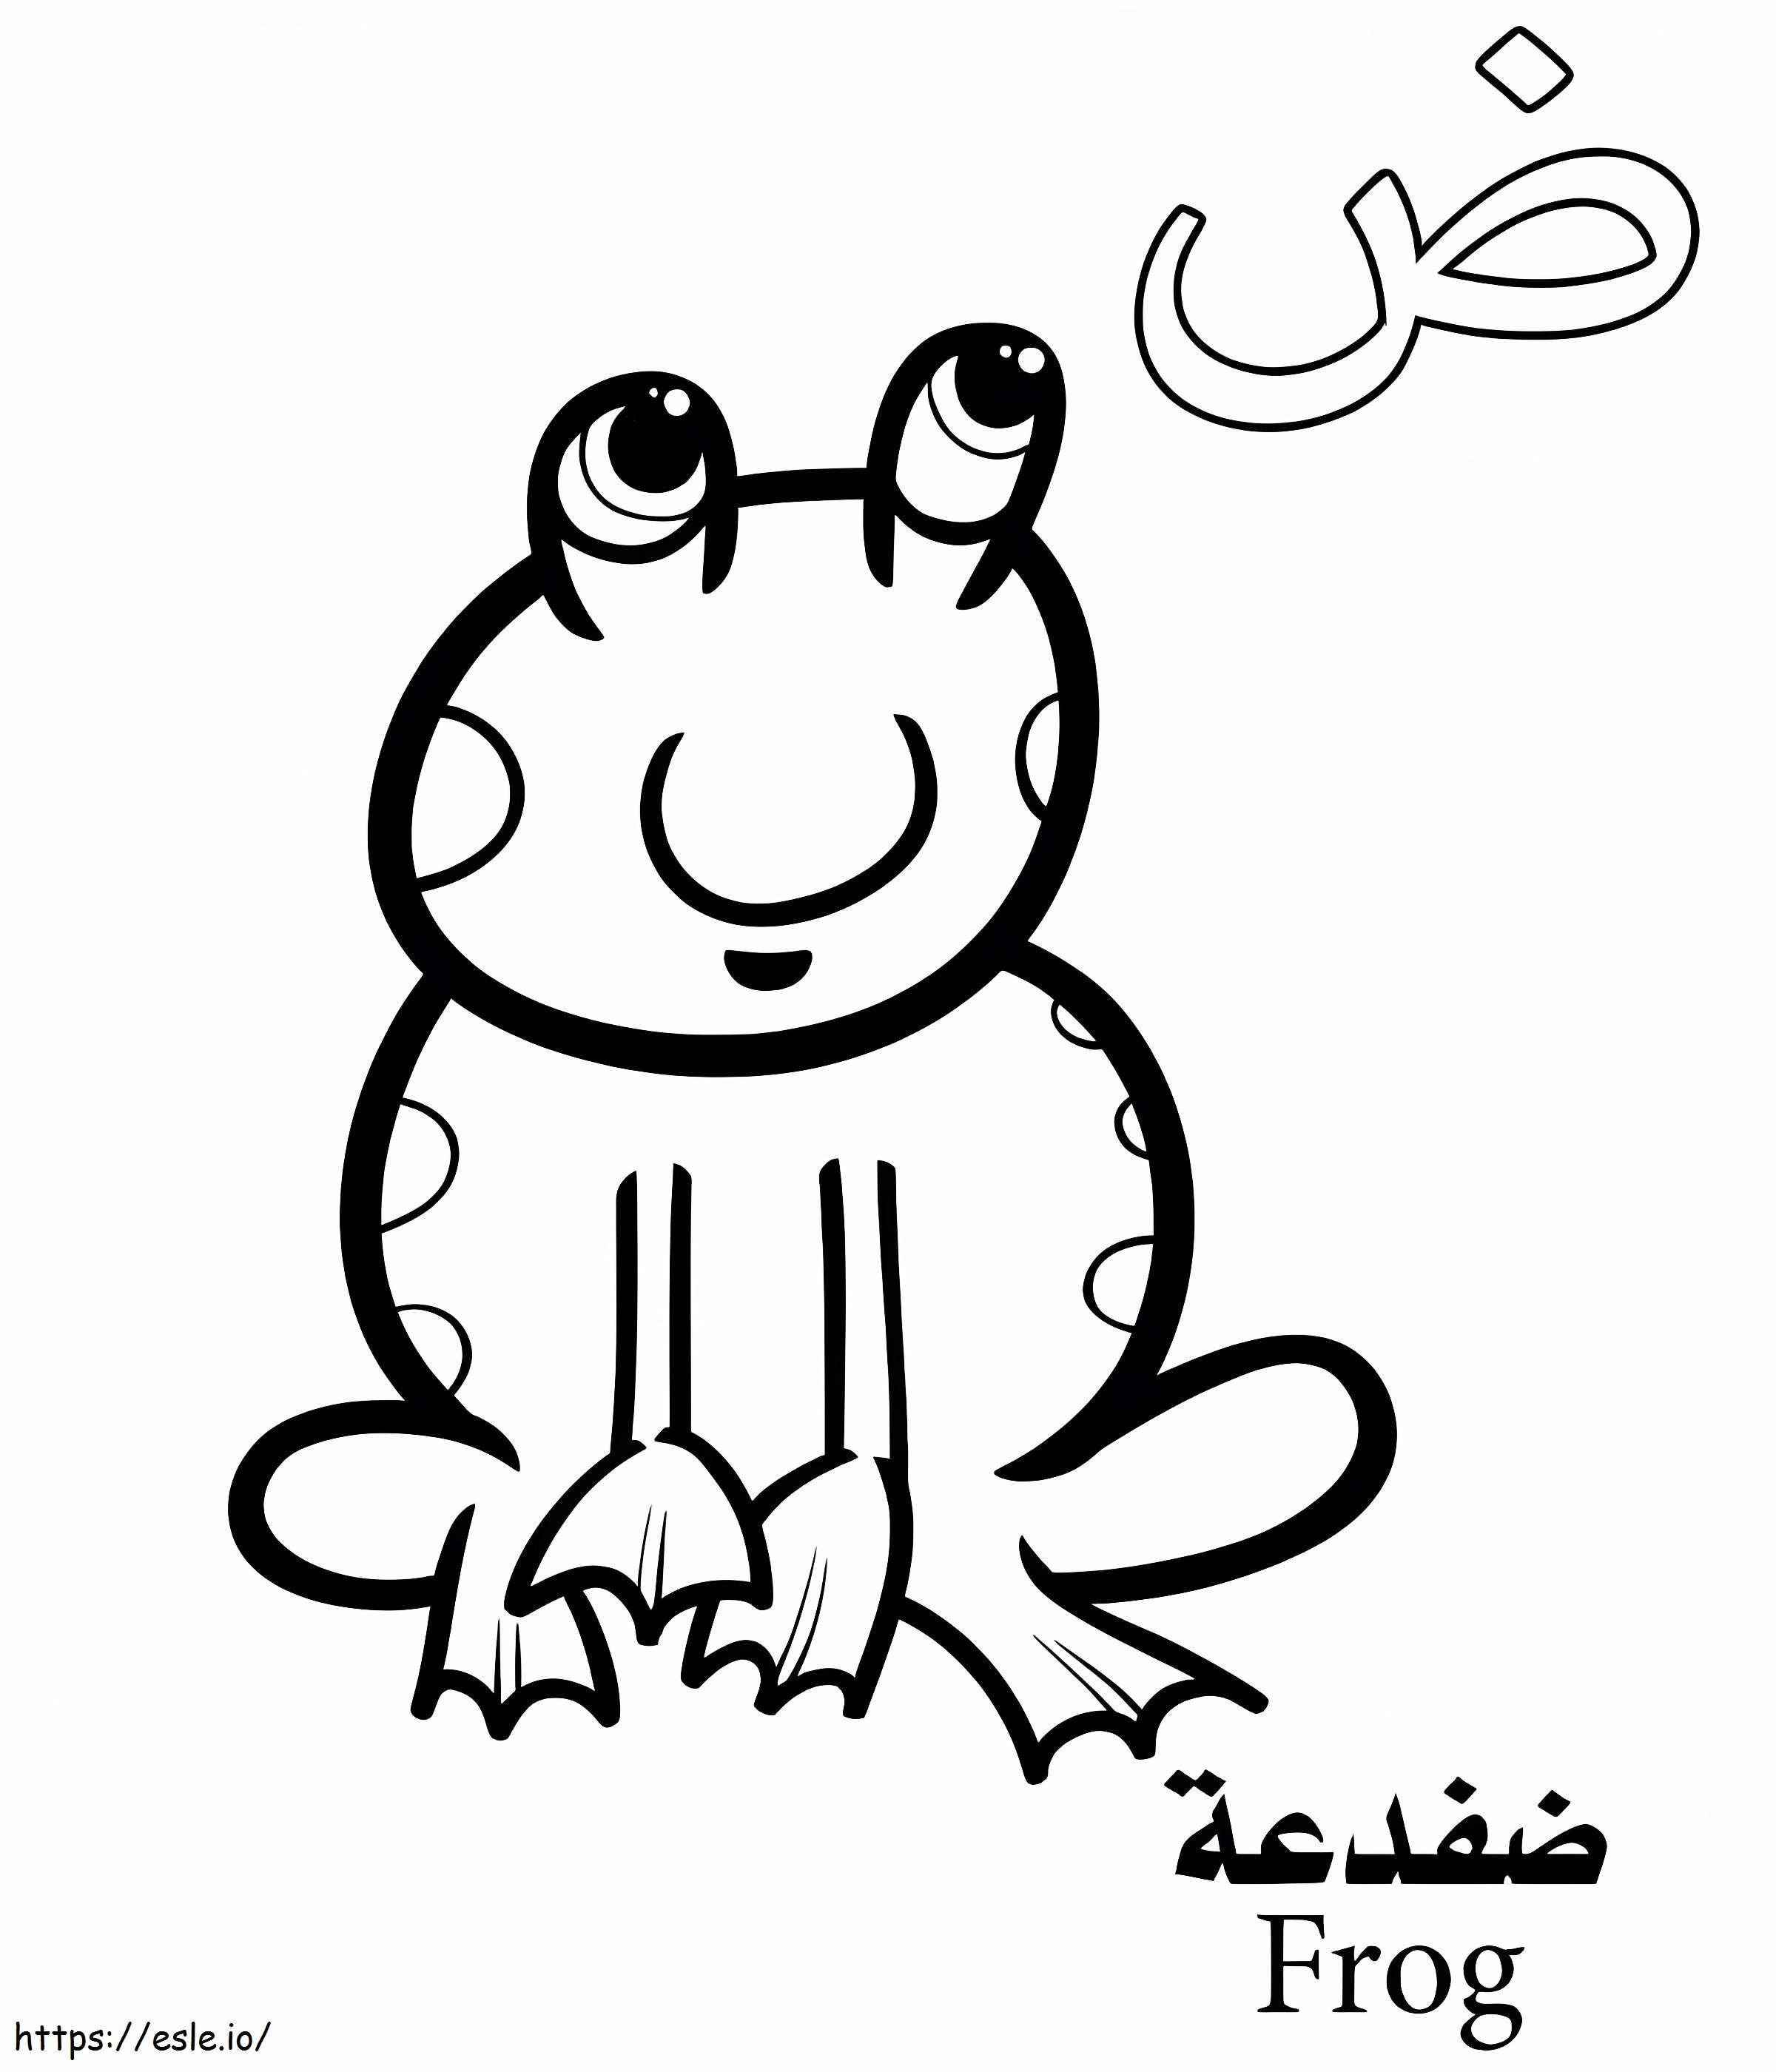 Frog Arabic Alphabet coloring page